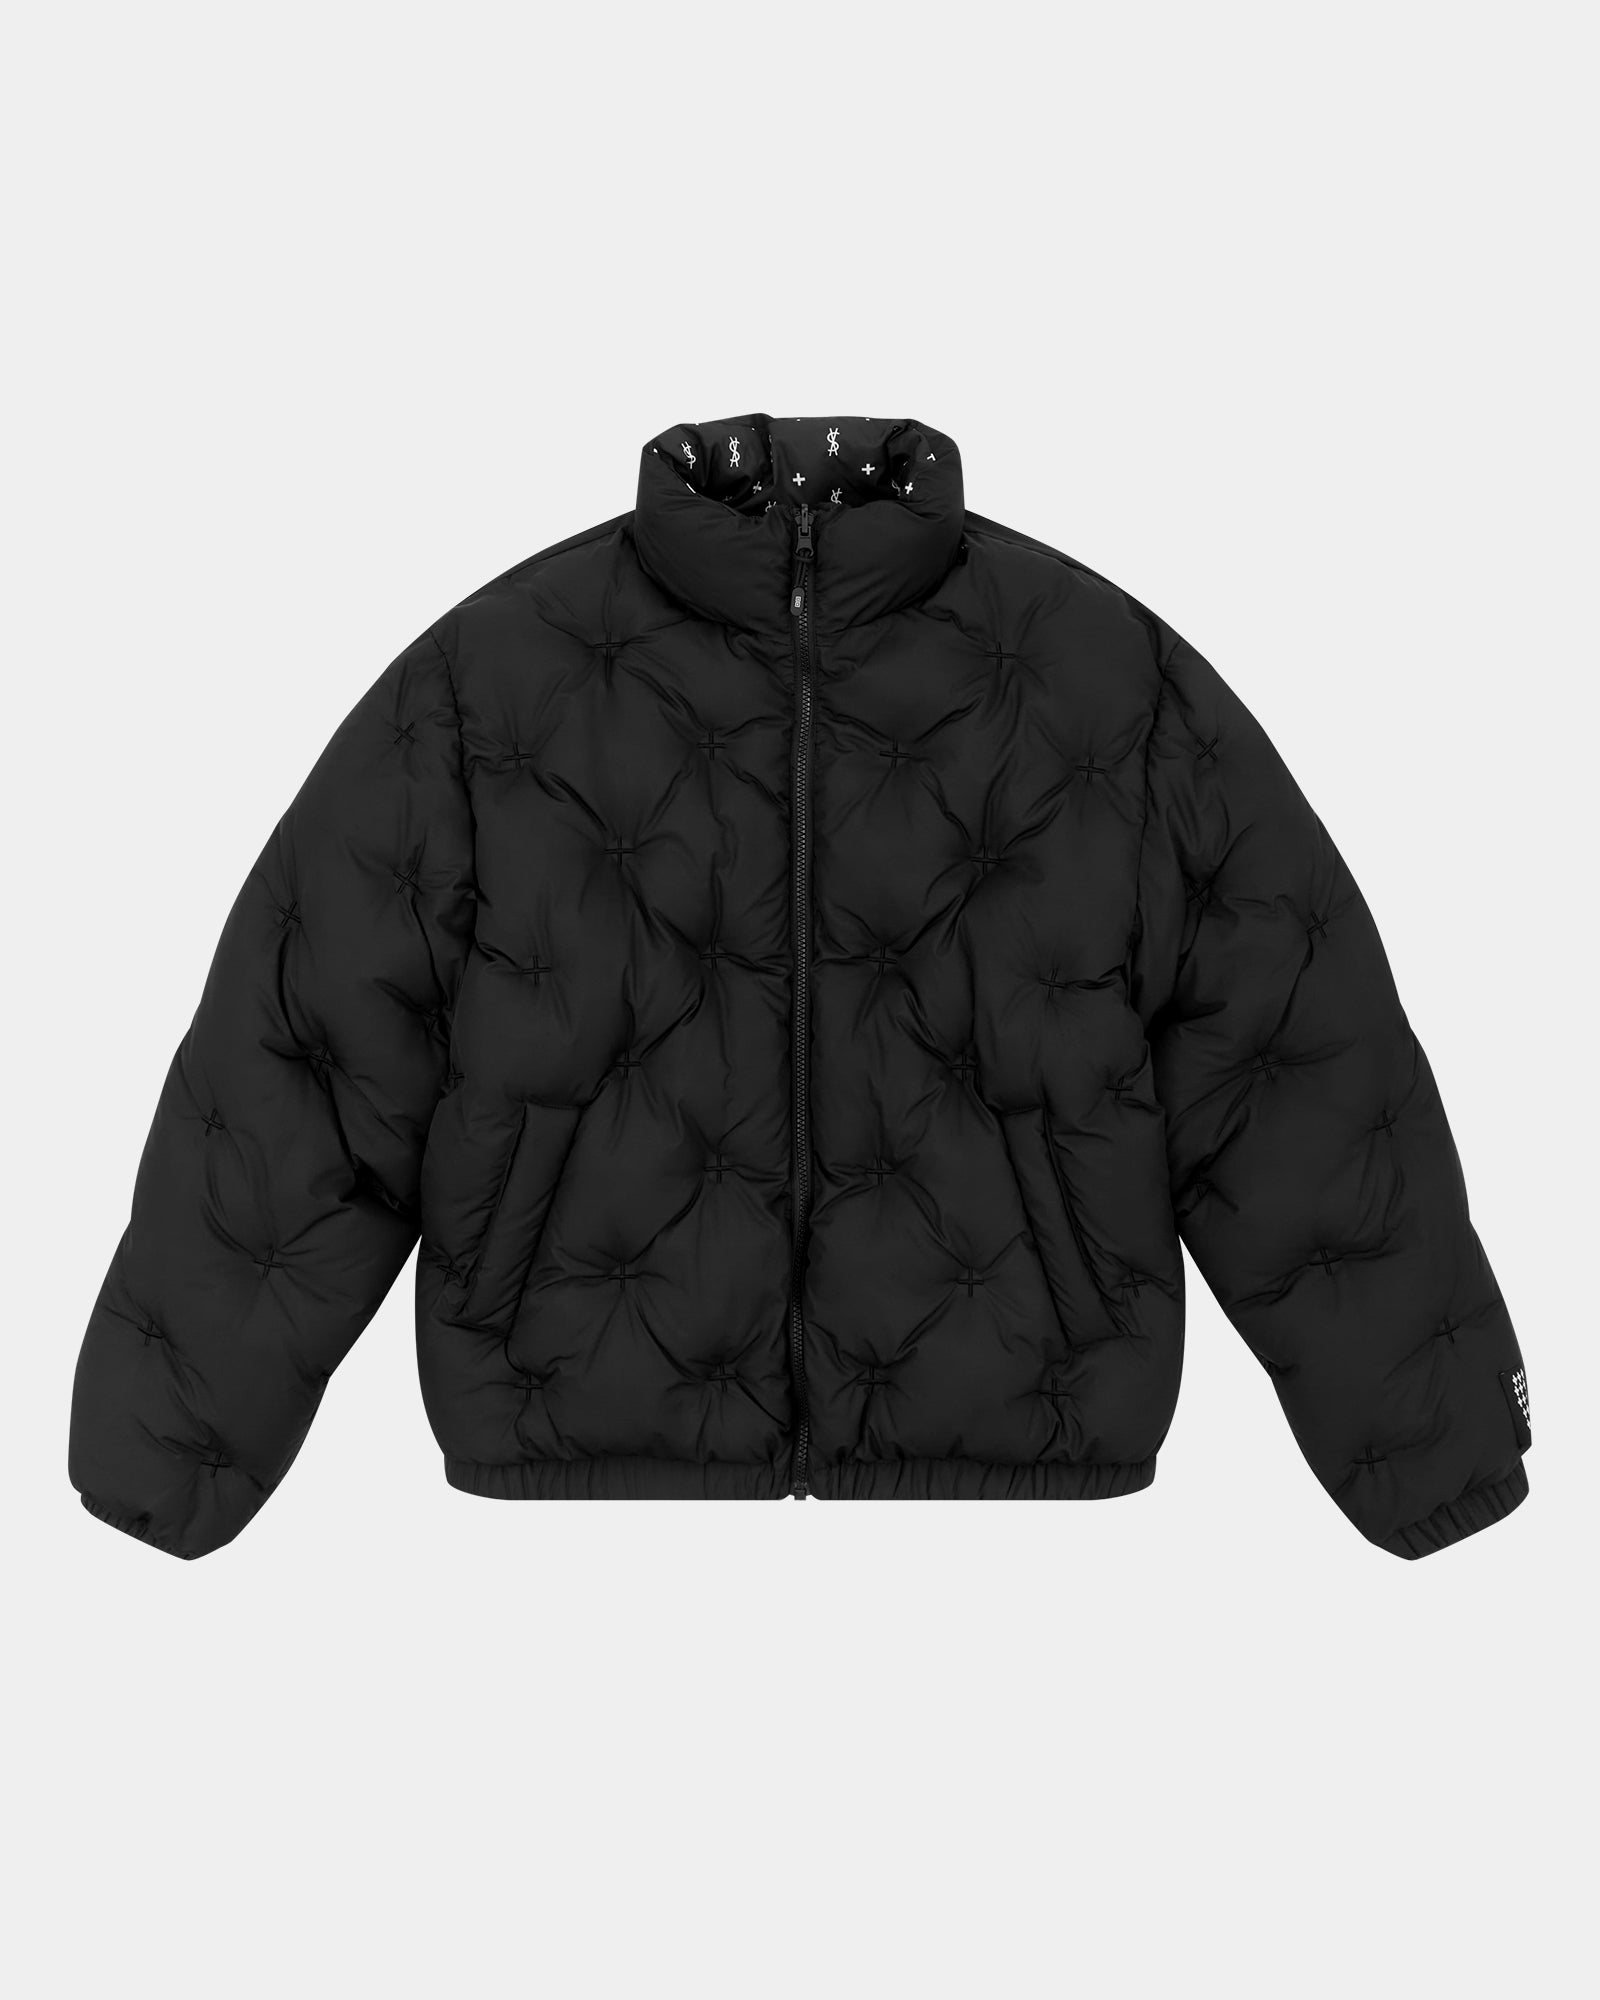 Destiny Short Puffer Jacket Black - New In from Ruby Room UK